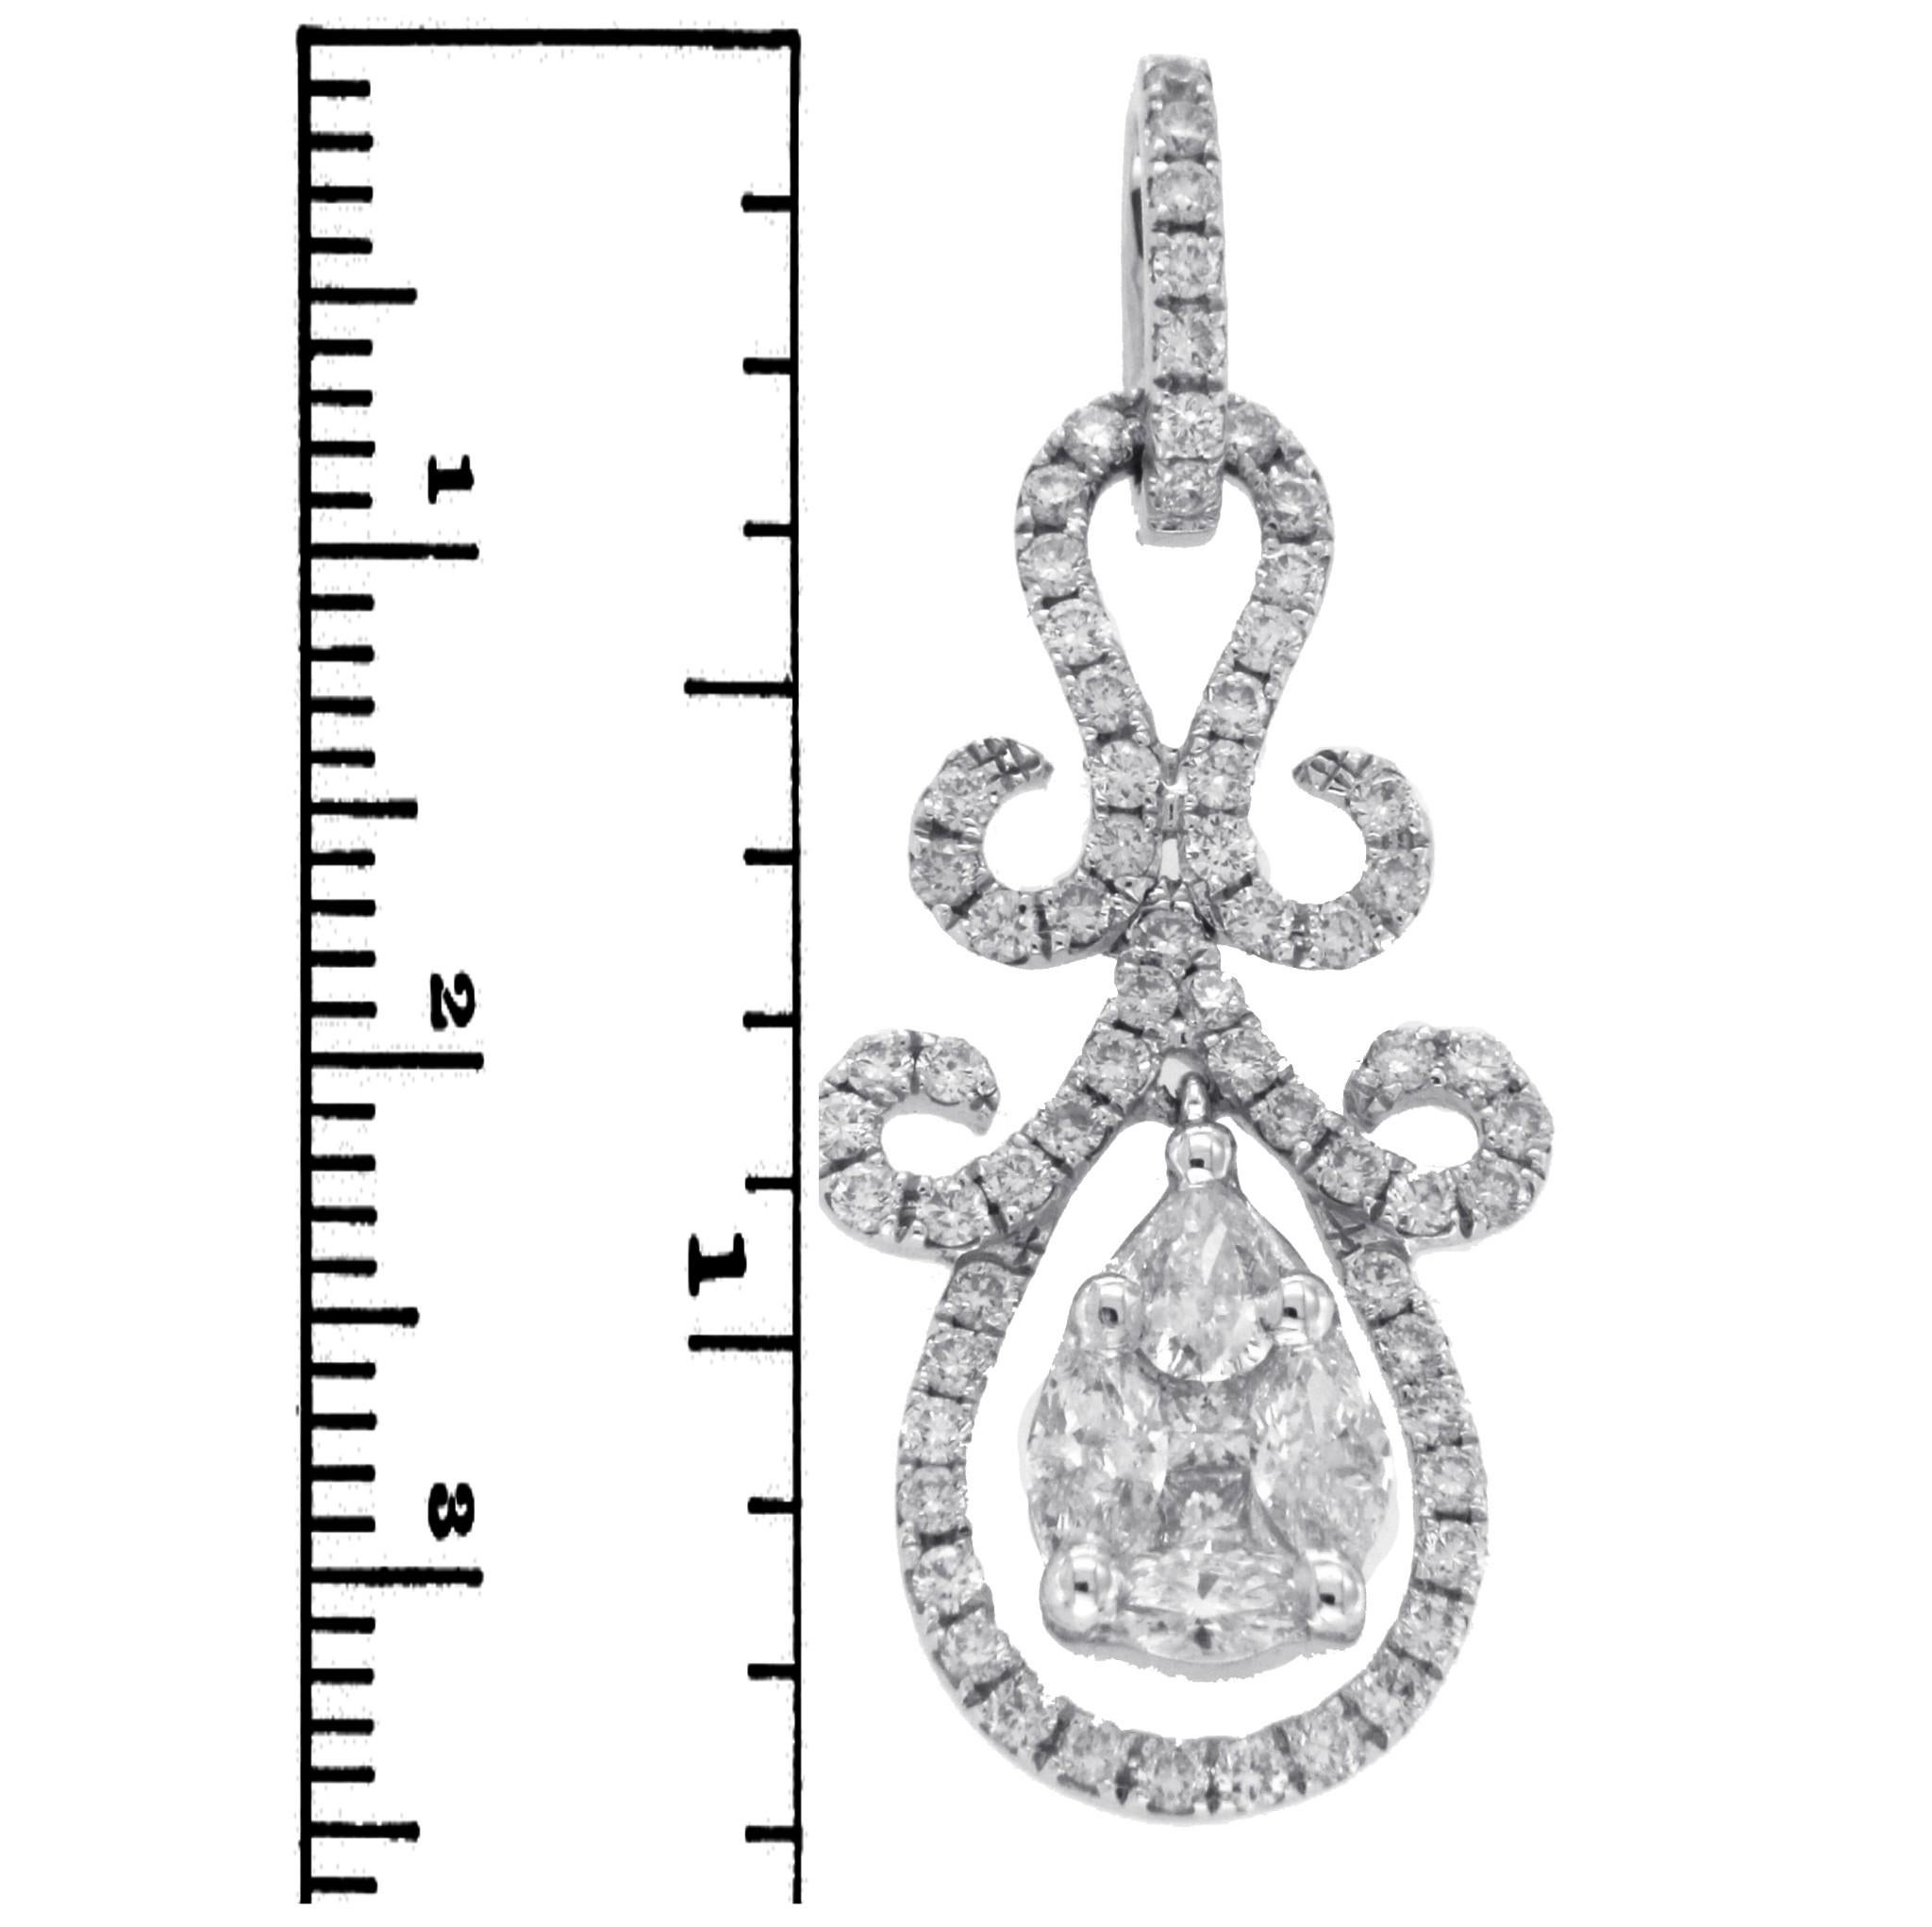 DESCRIPTION
Type: Pendant
Height: 31 mm
Width: 10 mm
Metal: White Gold
Metal Purity: 18K 
Hallmarks: 750
Total Weight: 2.44 Gram
Condition: New 
Stone Type: 0.96CT H SI Diamonds